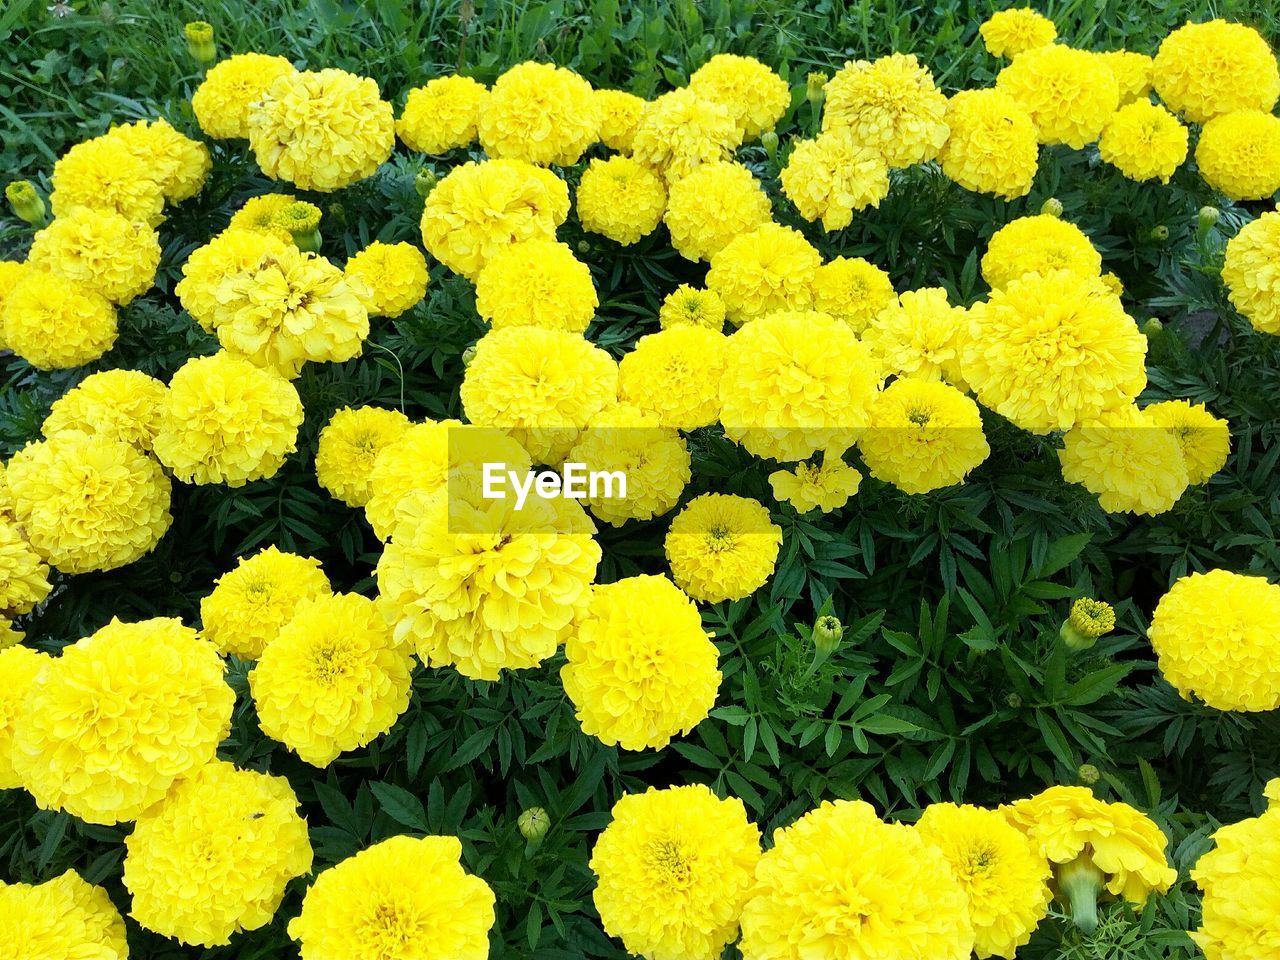 High angle view of yellow marigolds blooming outdoors